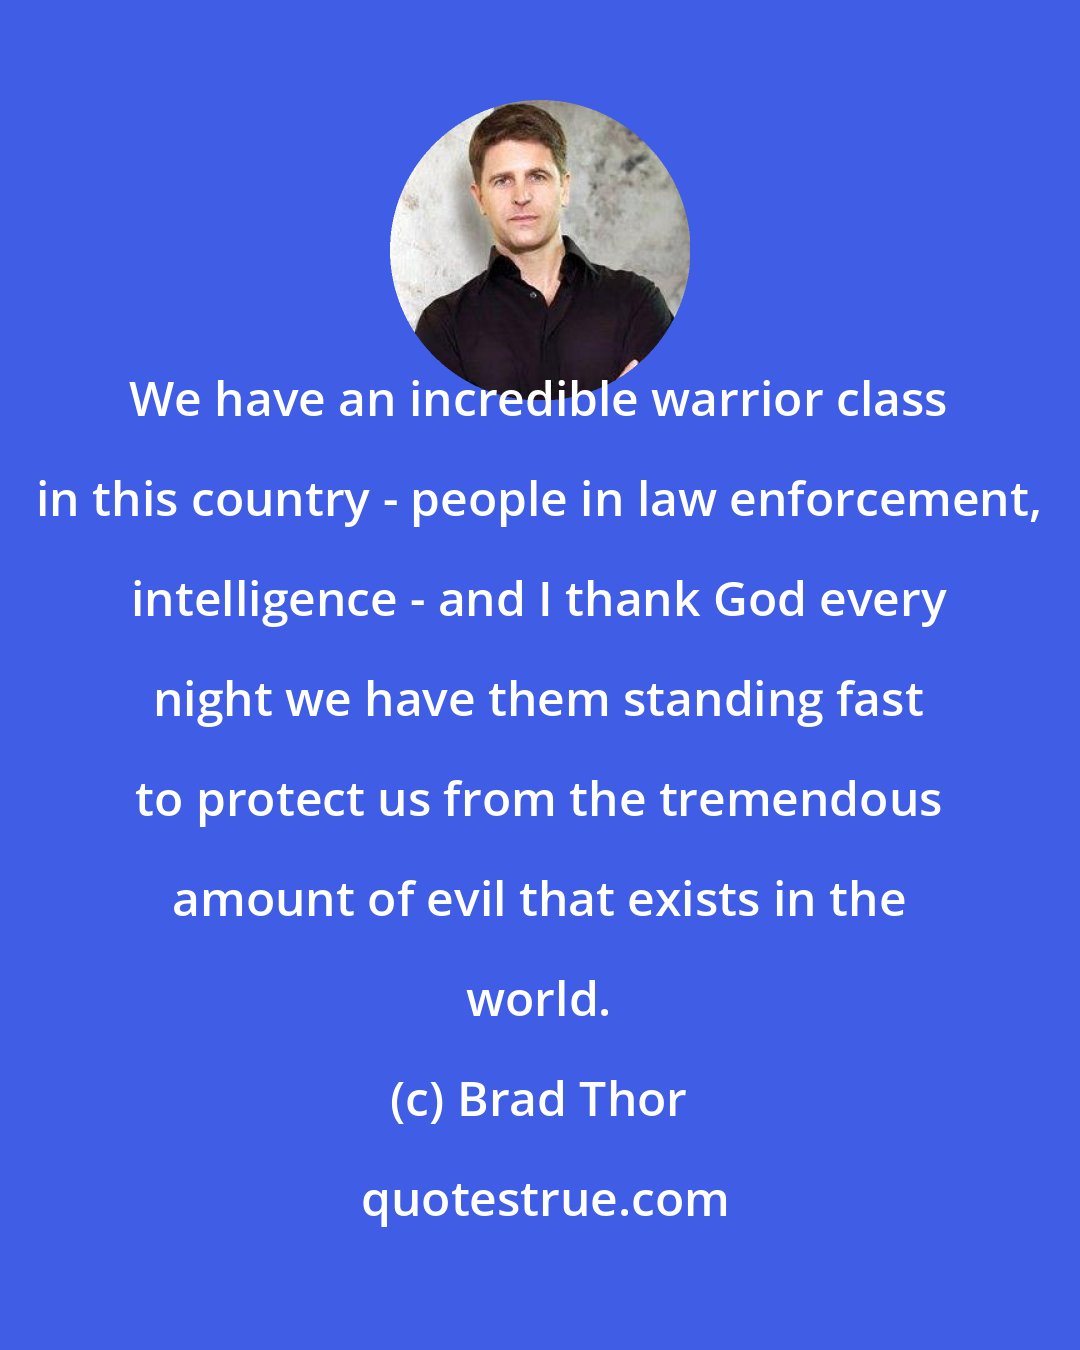 Brad Thor: We have an incredible warrior class in this country - people in law enforcement, intelligence - and I thank God every night we have them standing fast to protect us from the tremendous amount of evil that exists in the world.